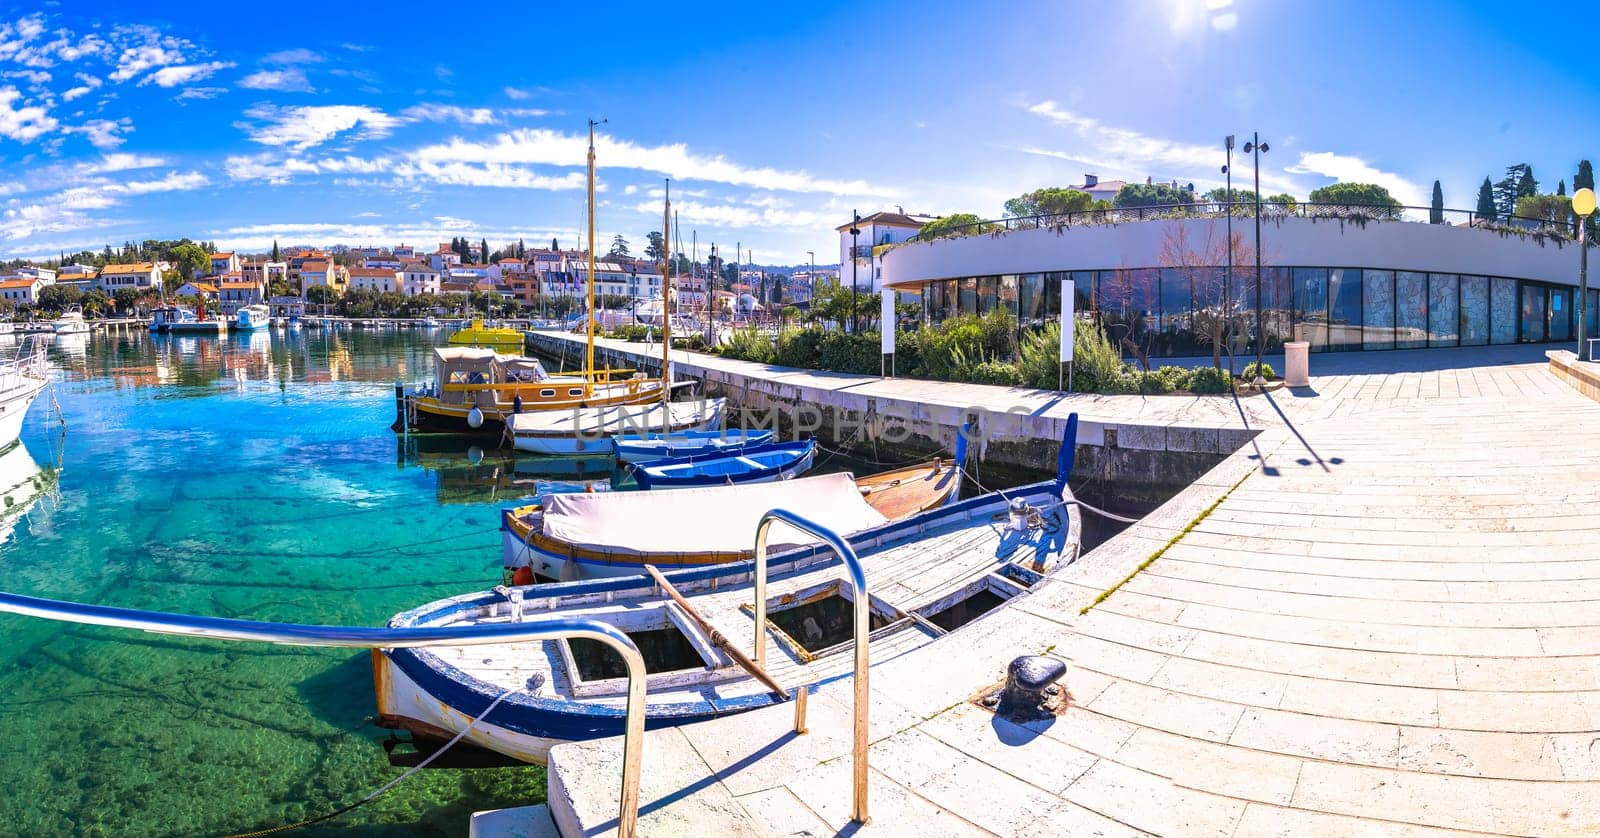 Krk. Town of Malinska harbor and waterfront view by xbrchx